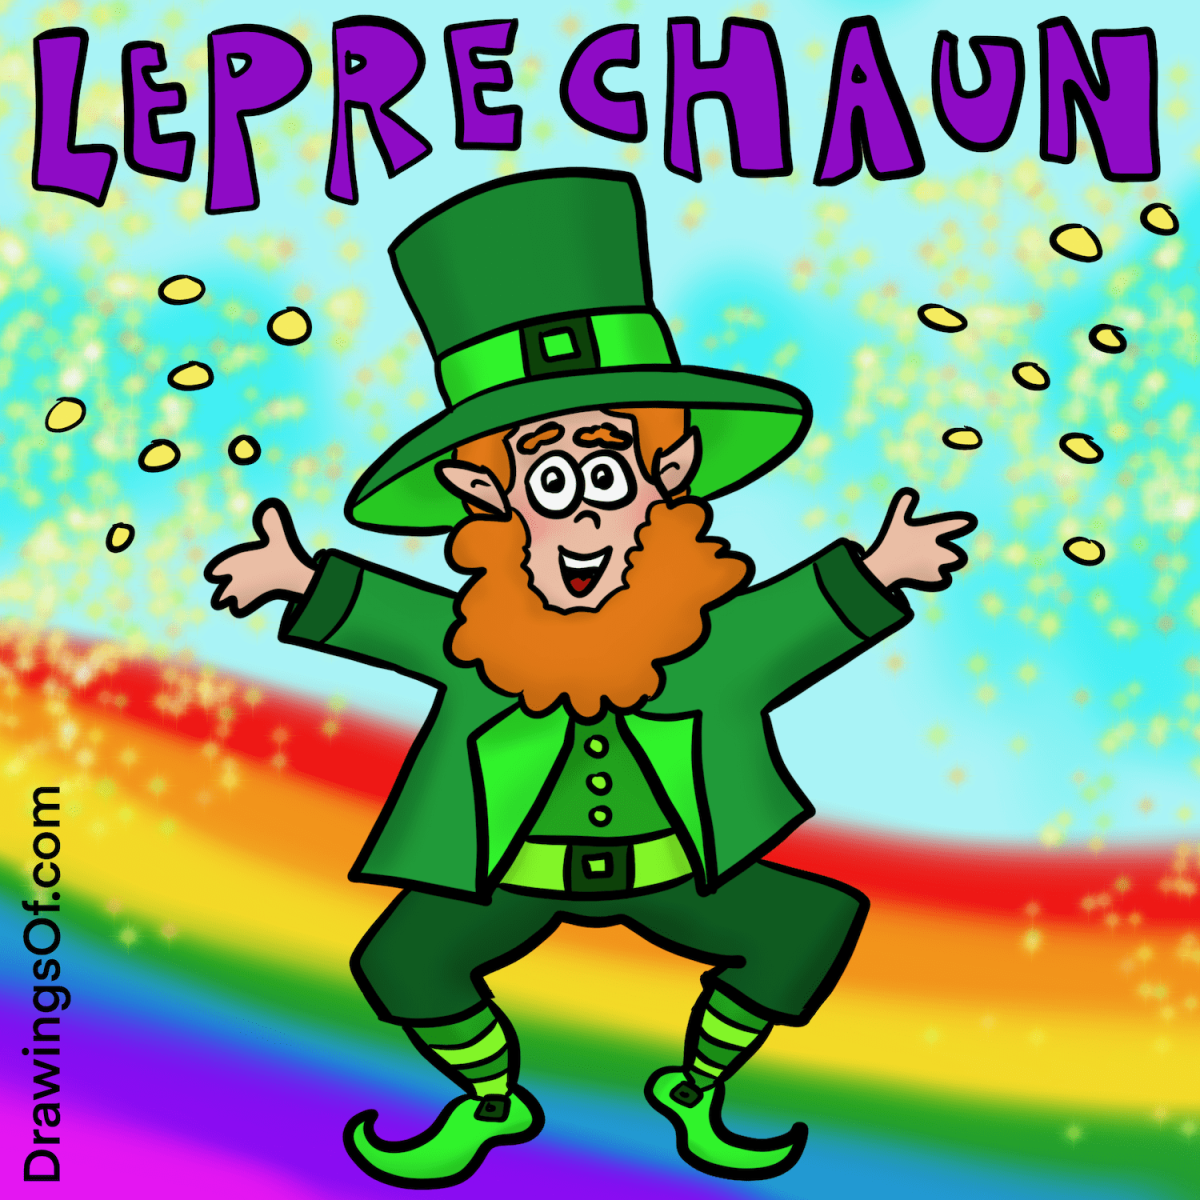 St. Patrick's Day drawings need leprechauns.